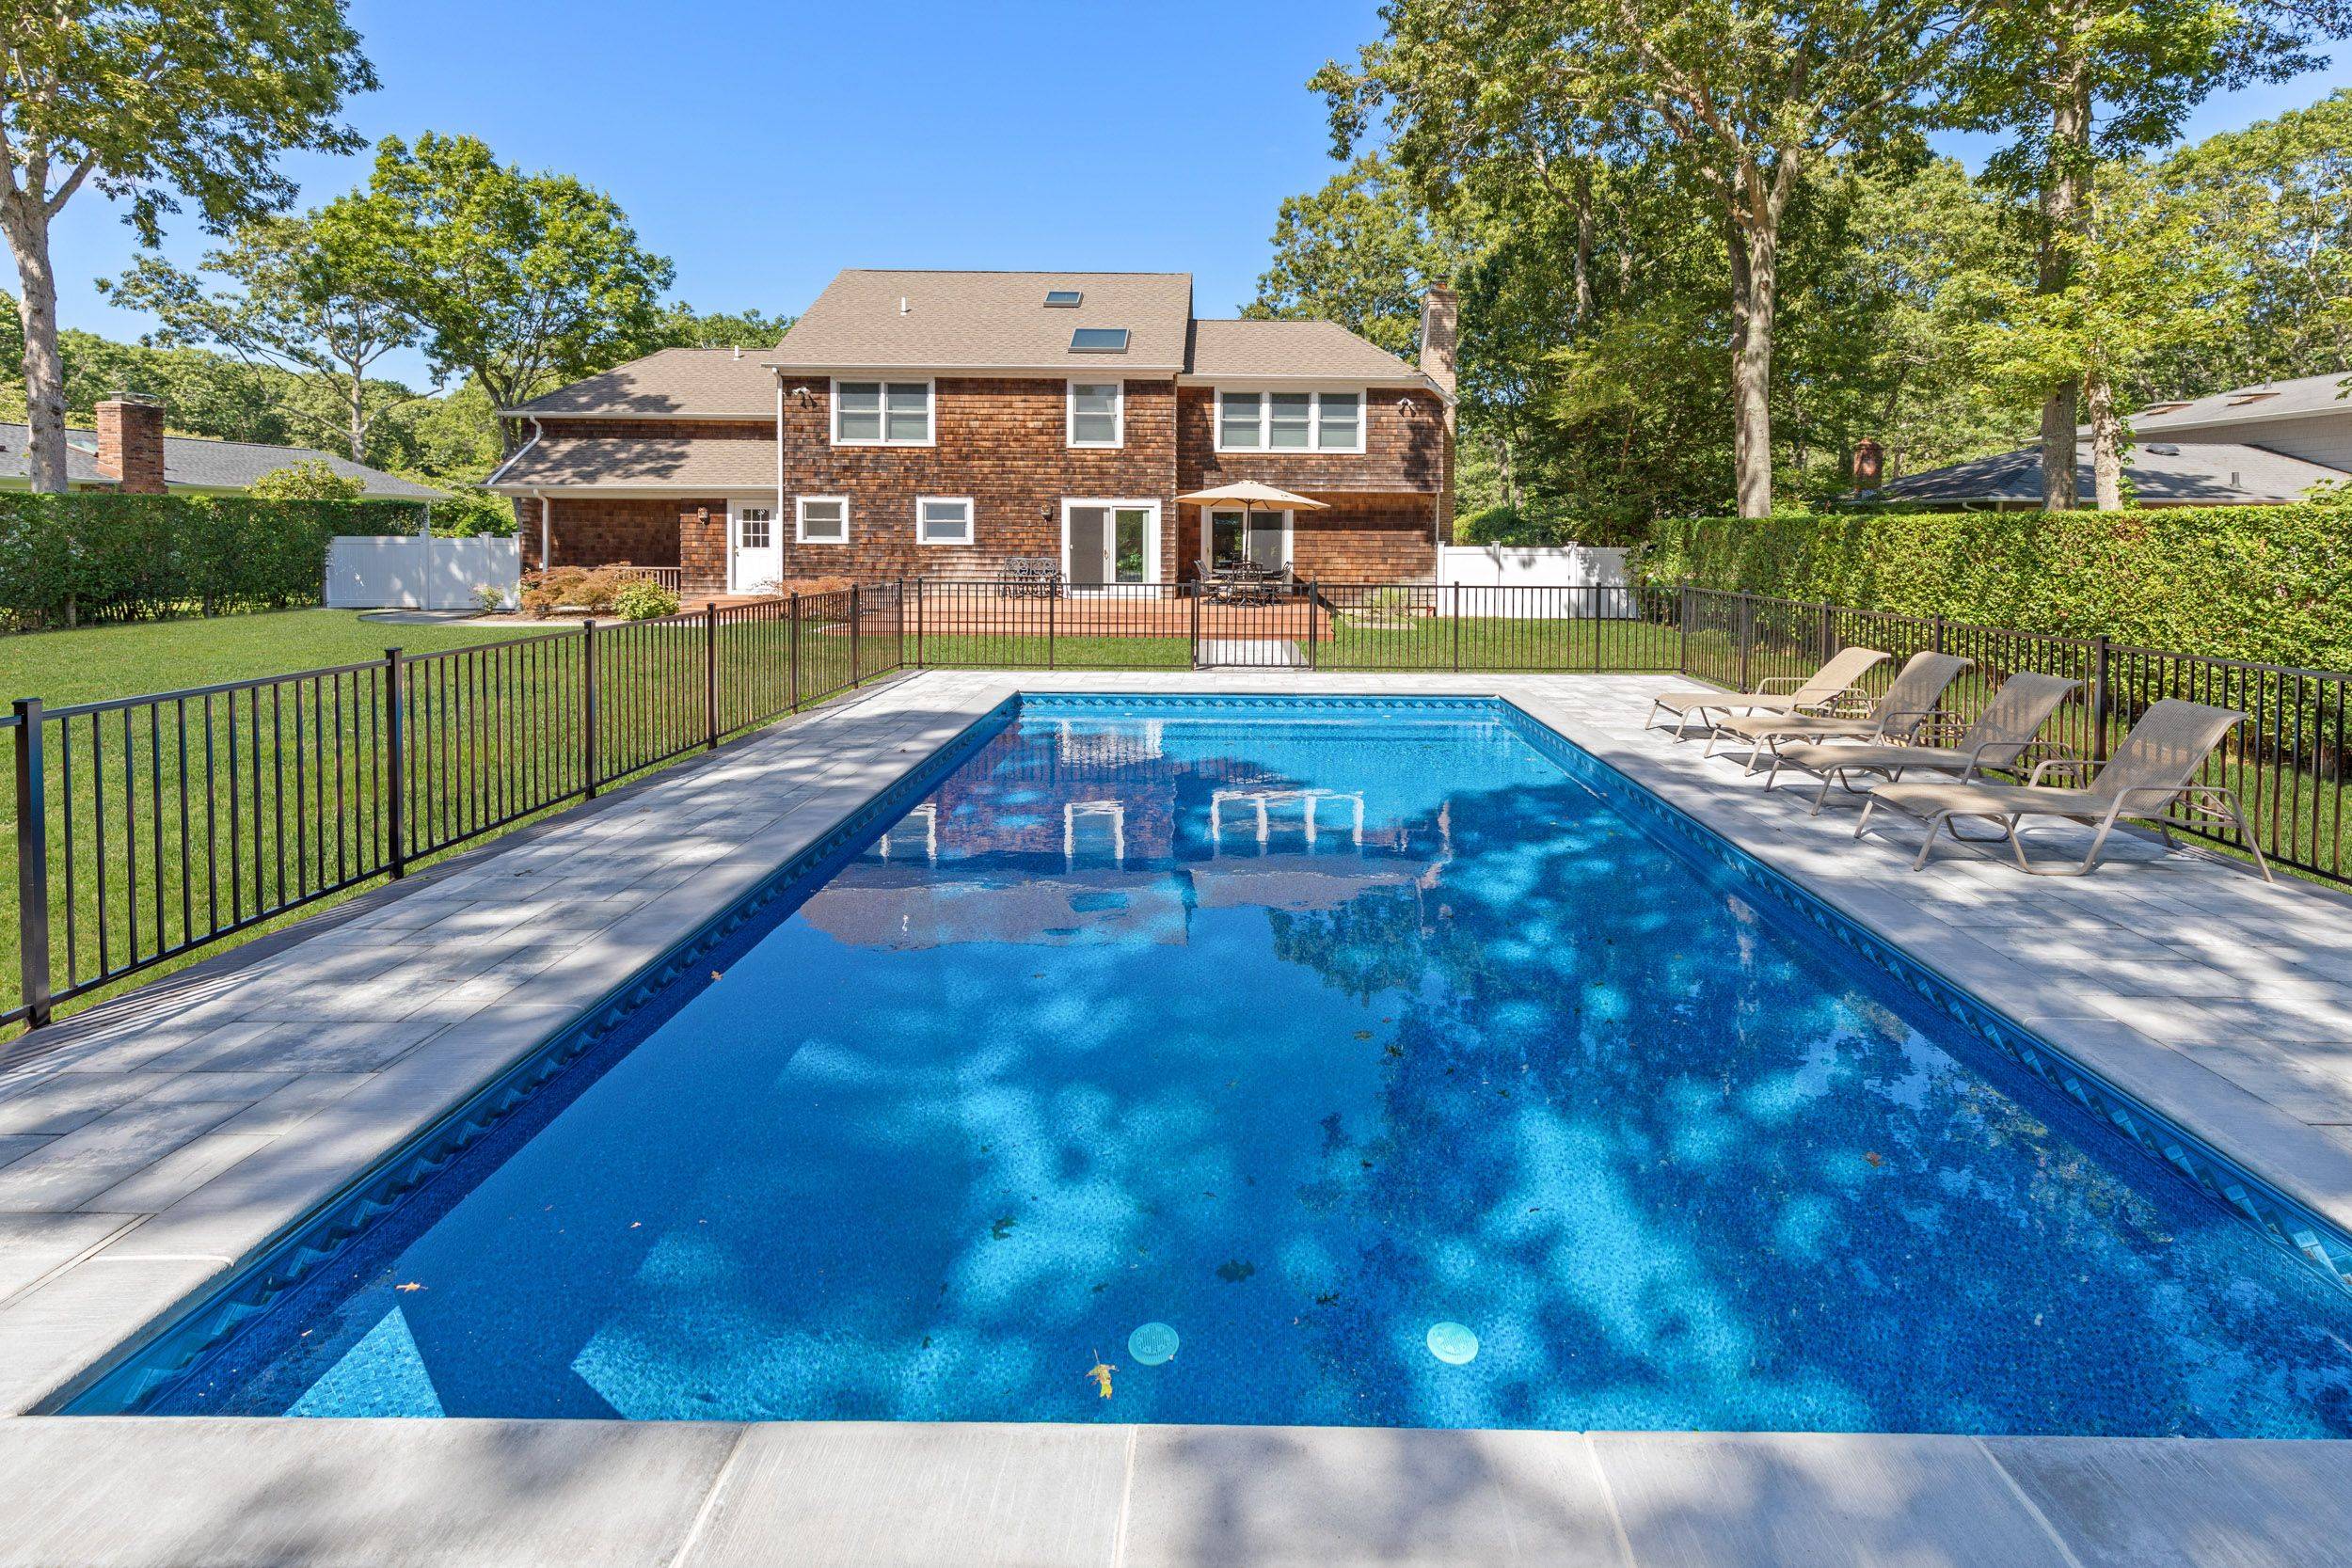 East Quogue South With a Brand New Pool!